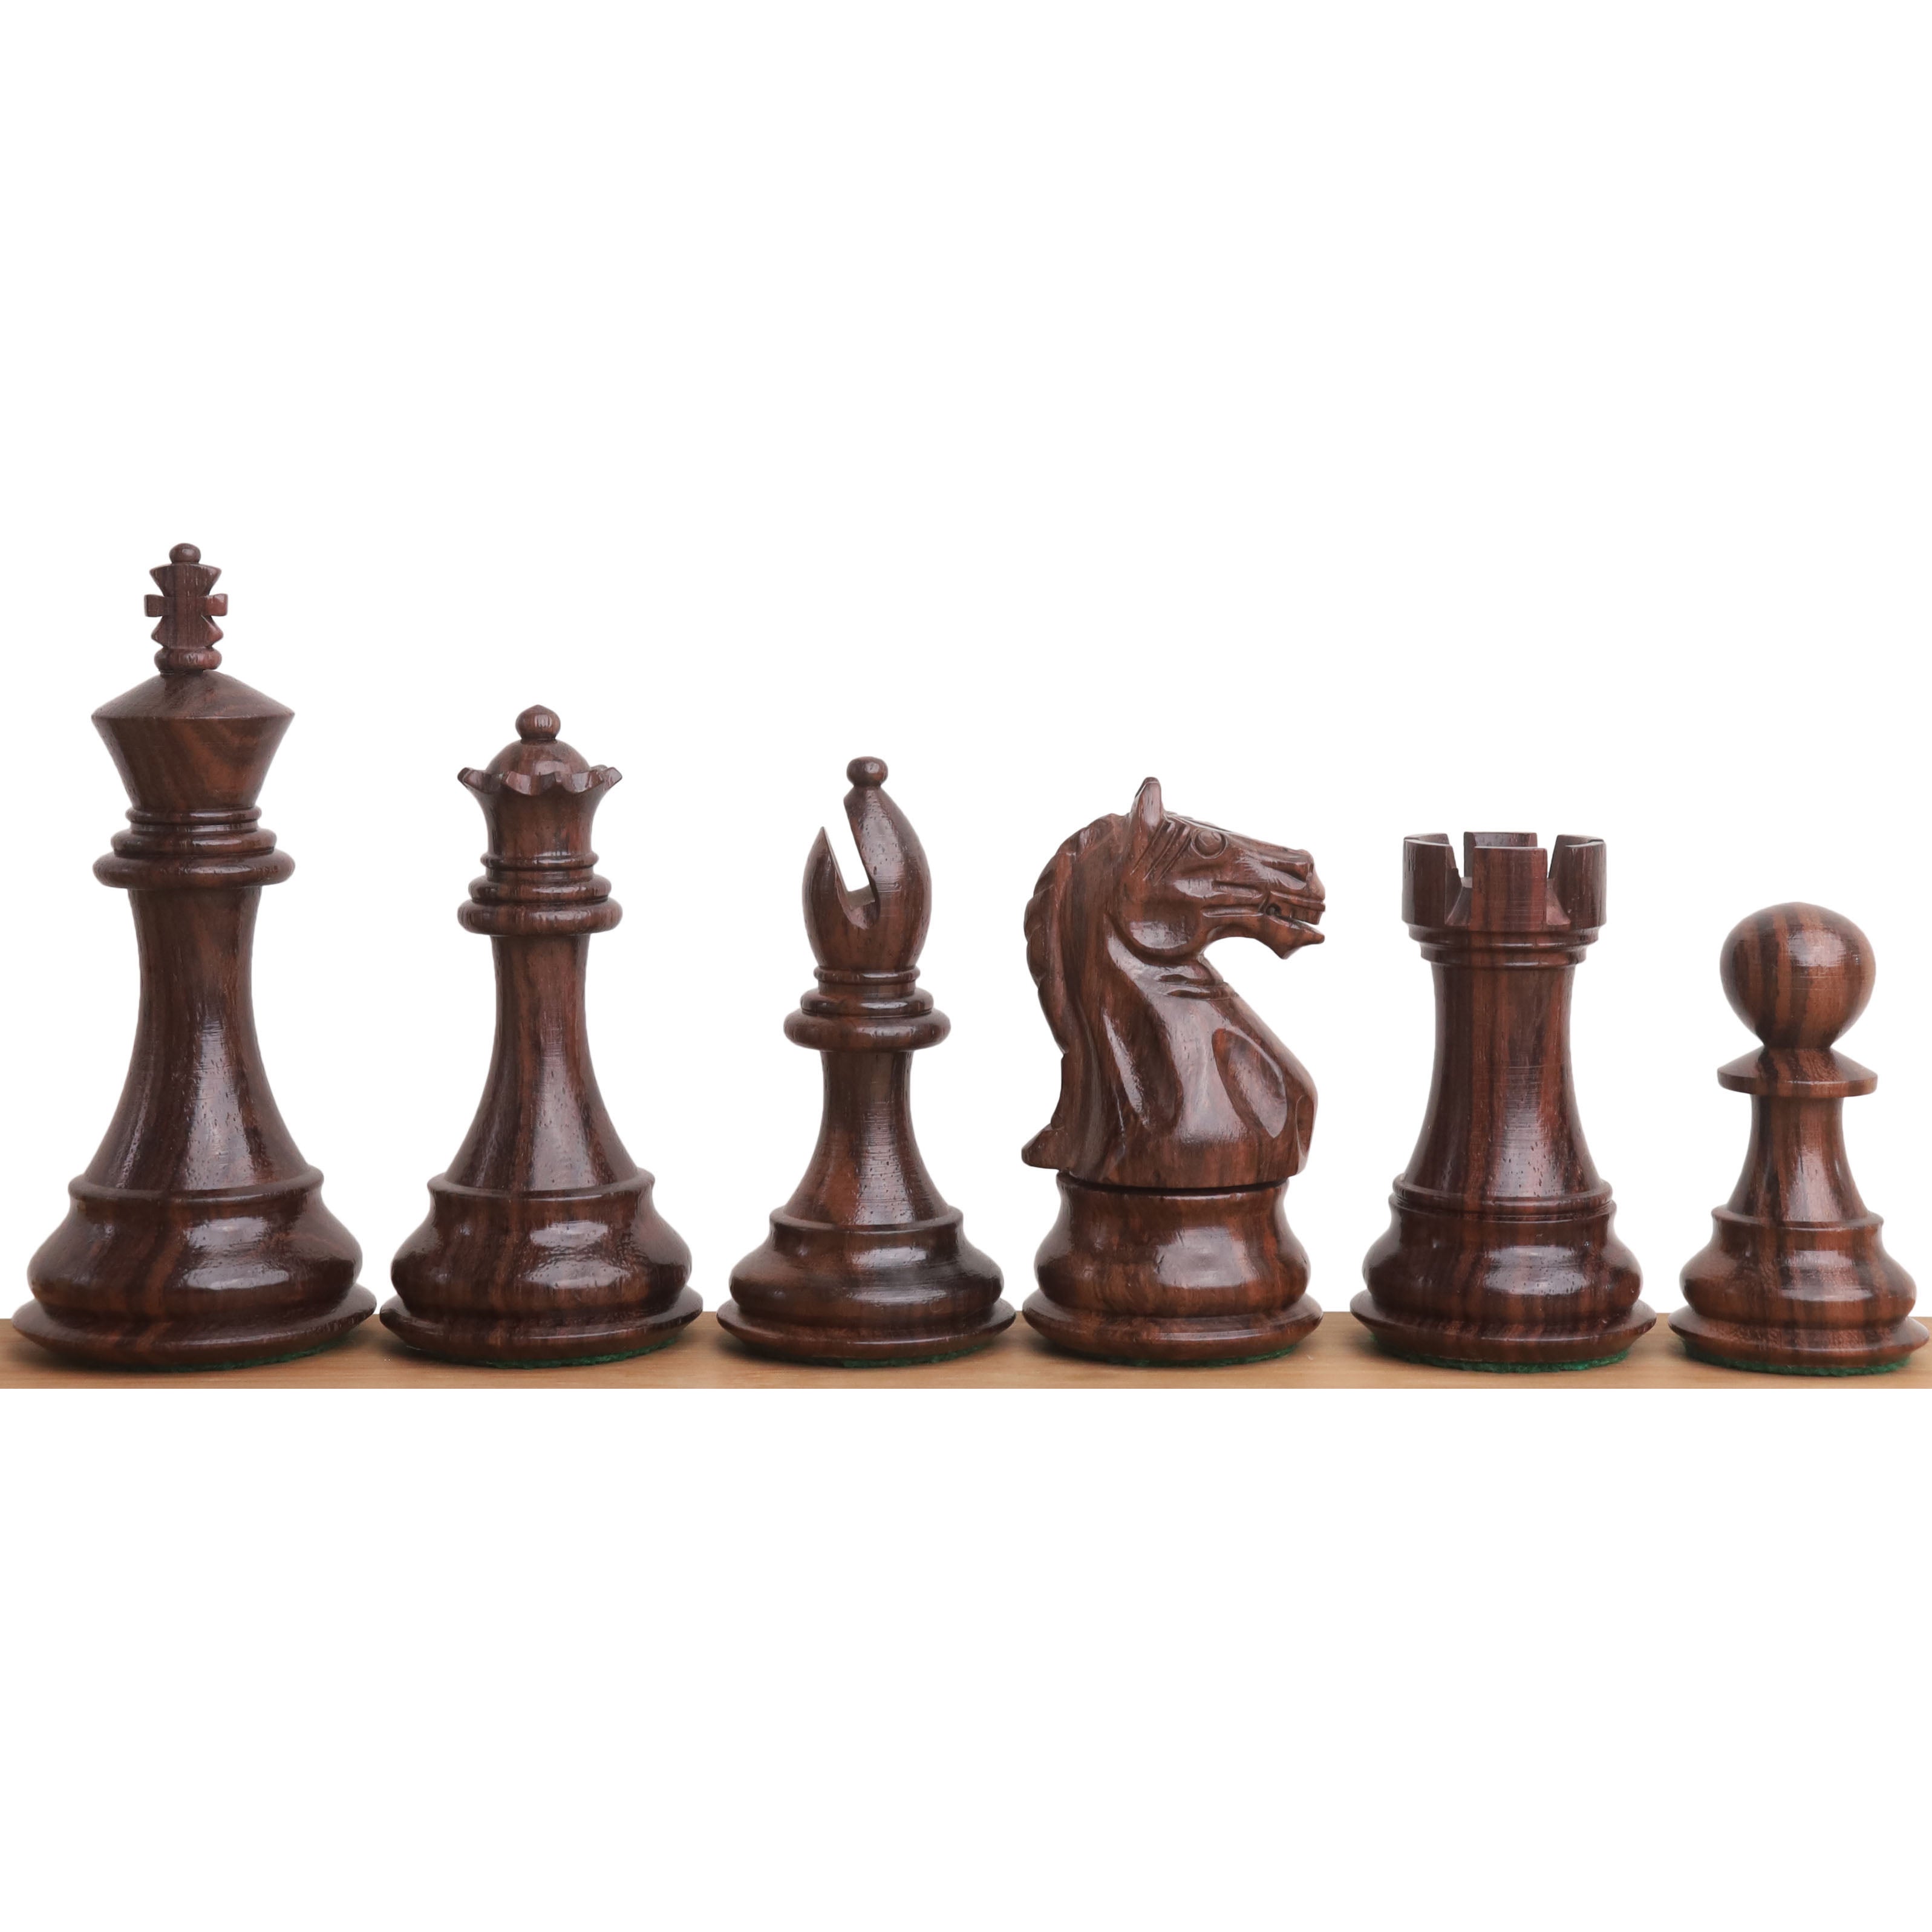 4" Fierce Knight Combo Chess Set - Rosewood Chess Pieces + Board With Leatherette Coffer Storage Box